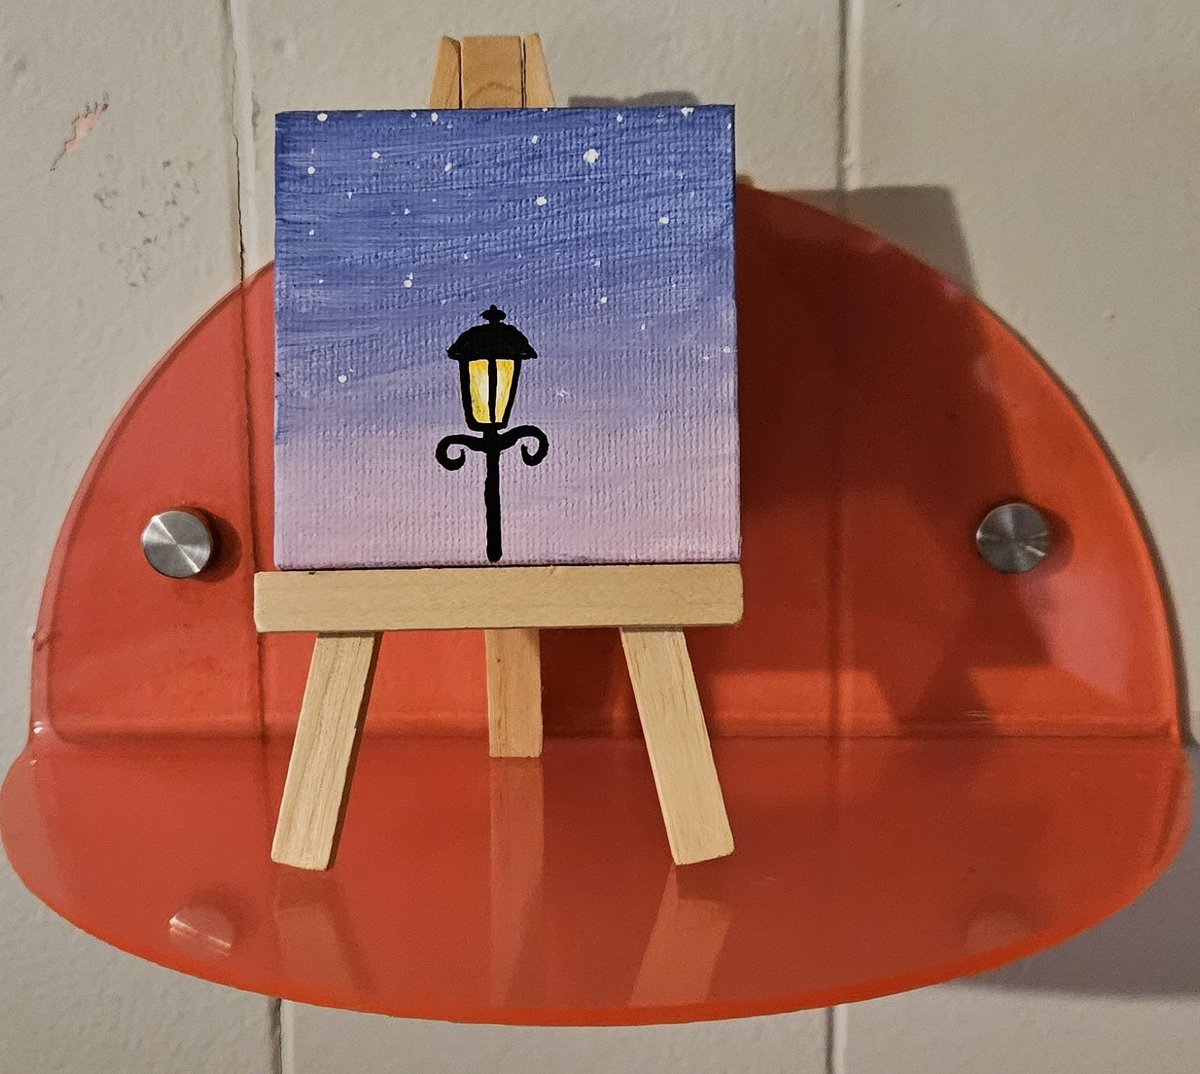 #tinypainting